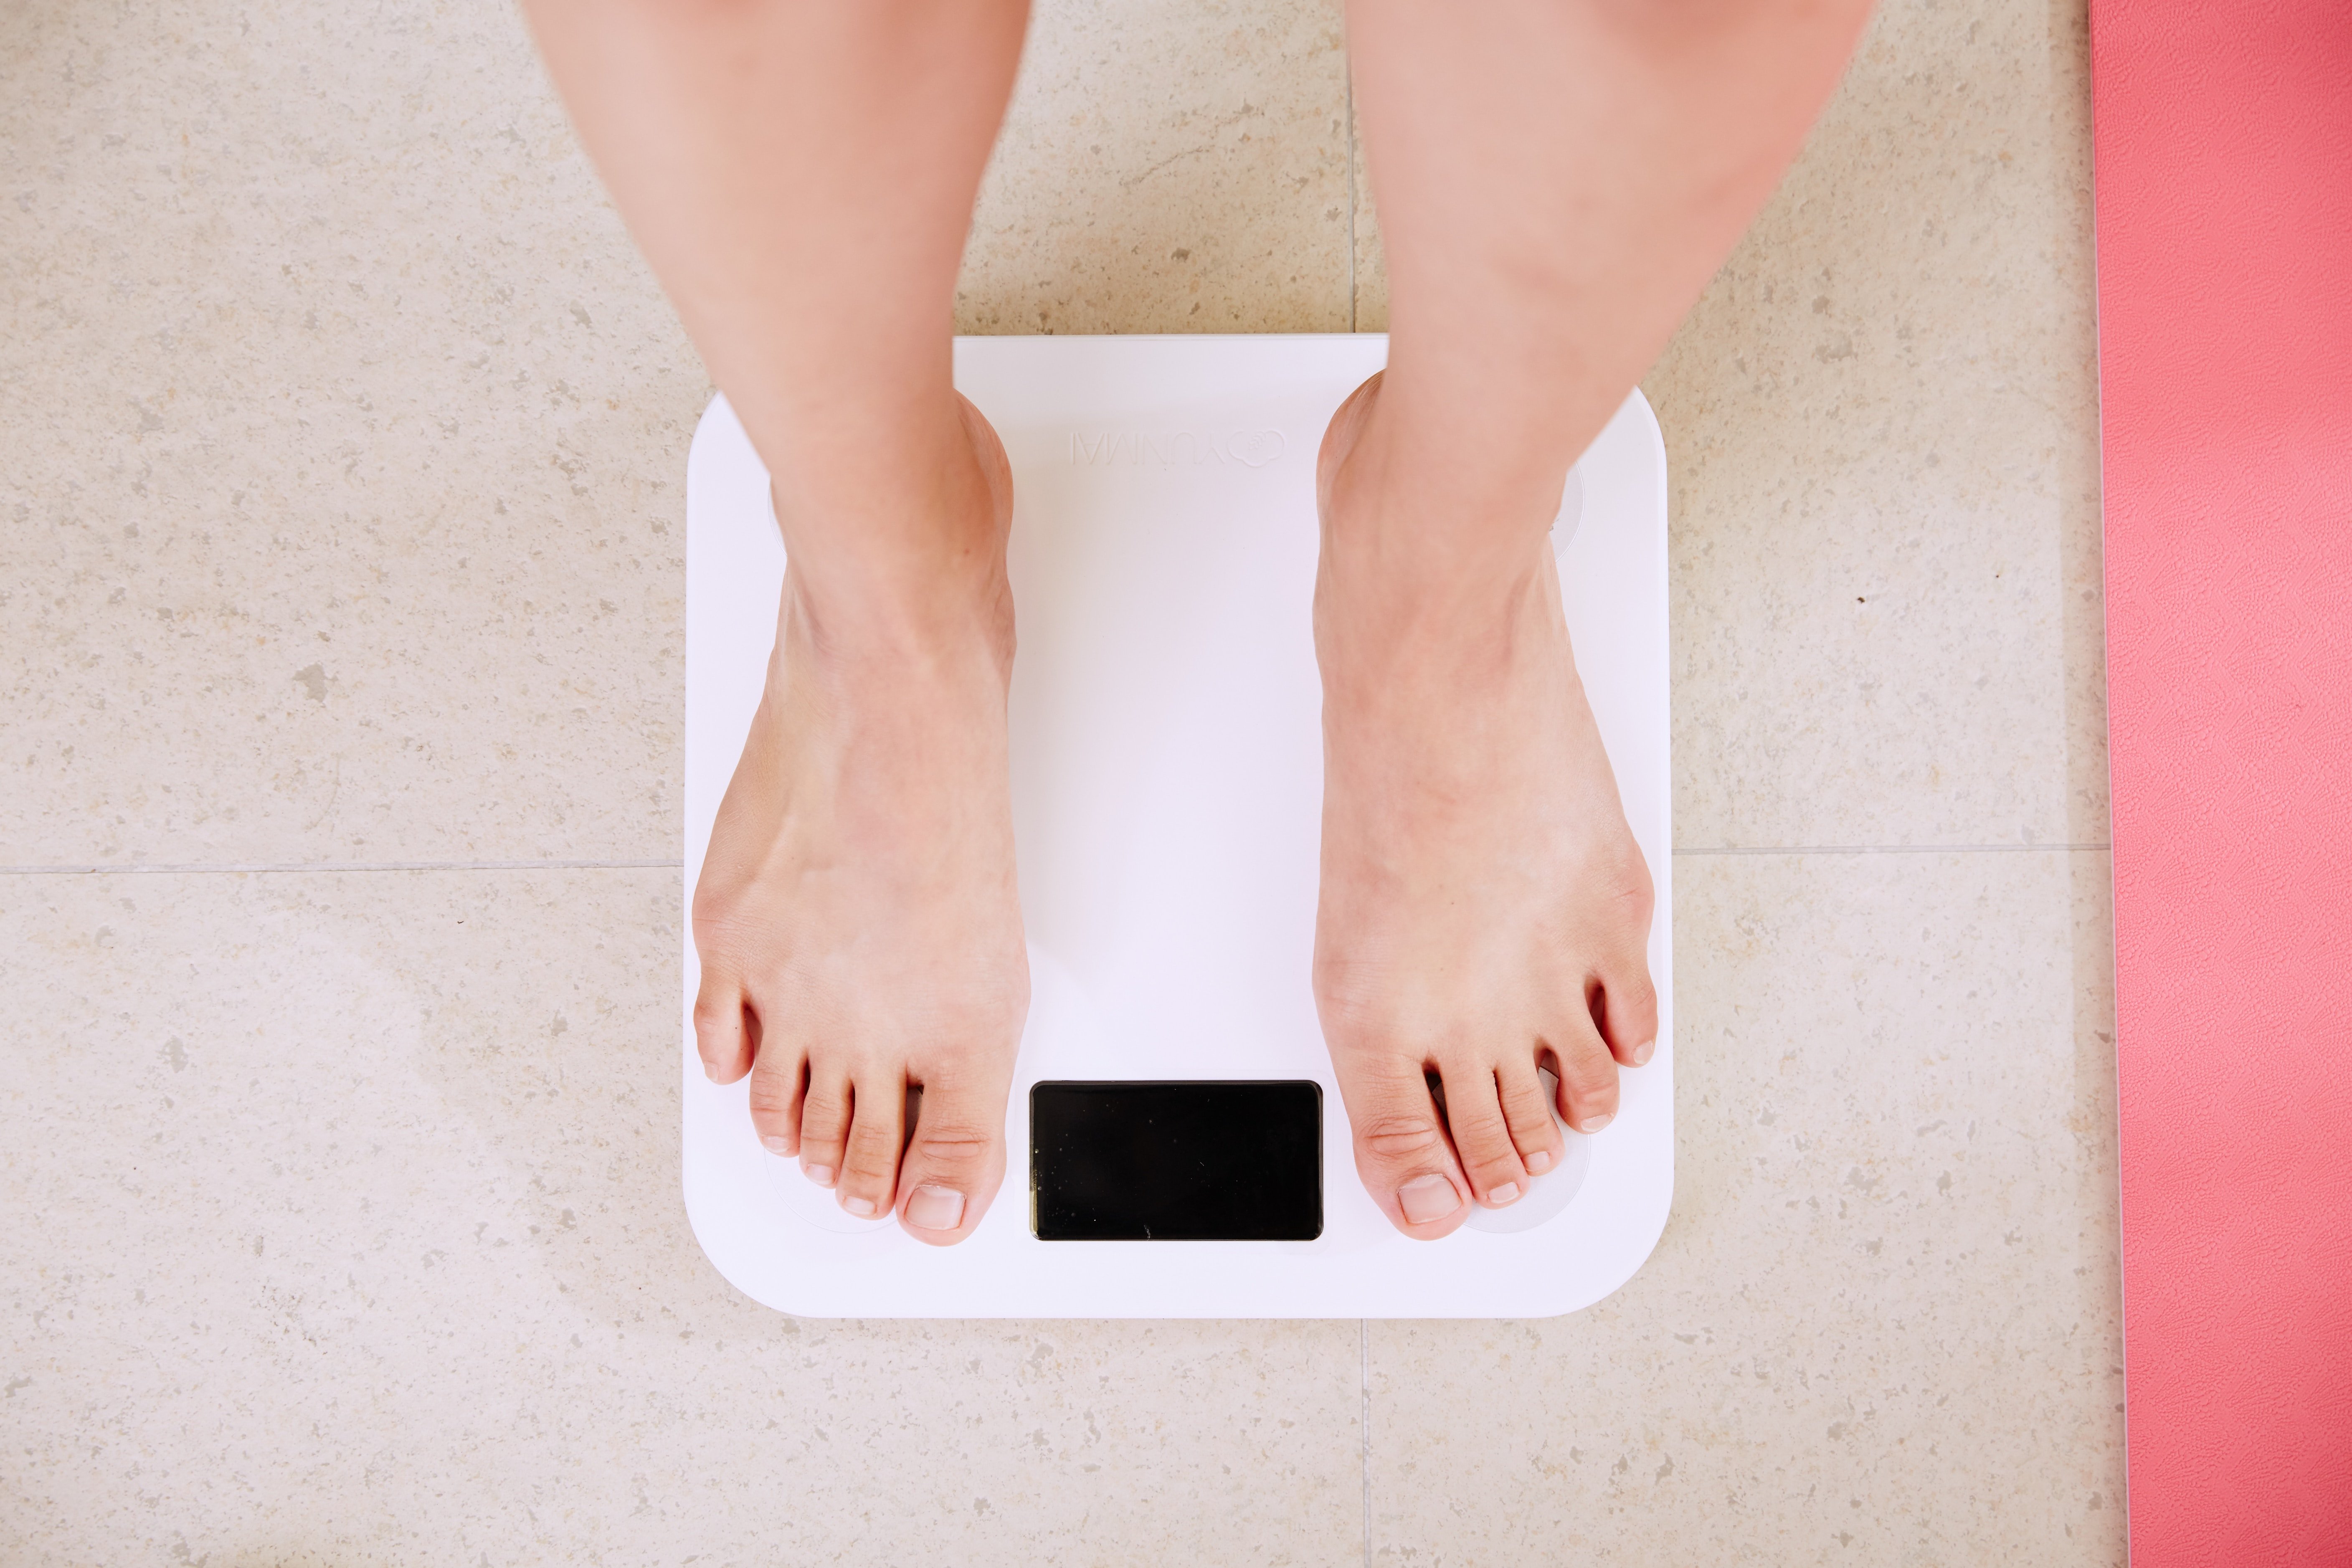 A weighing scale. | Source: Unsplash